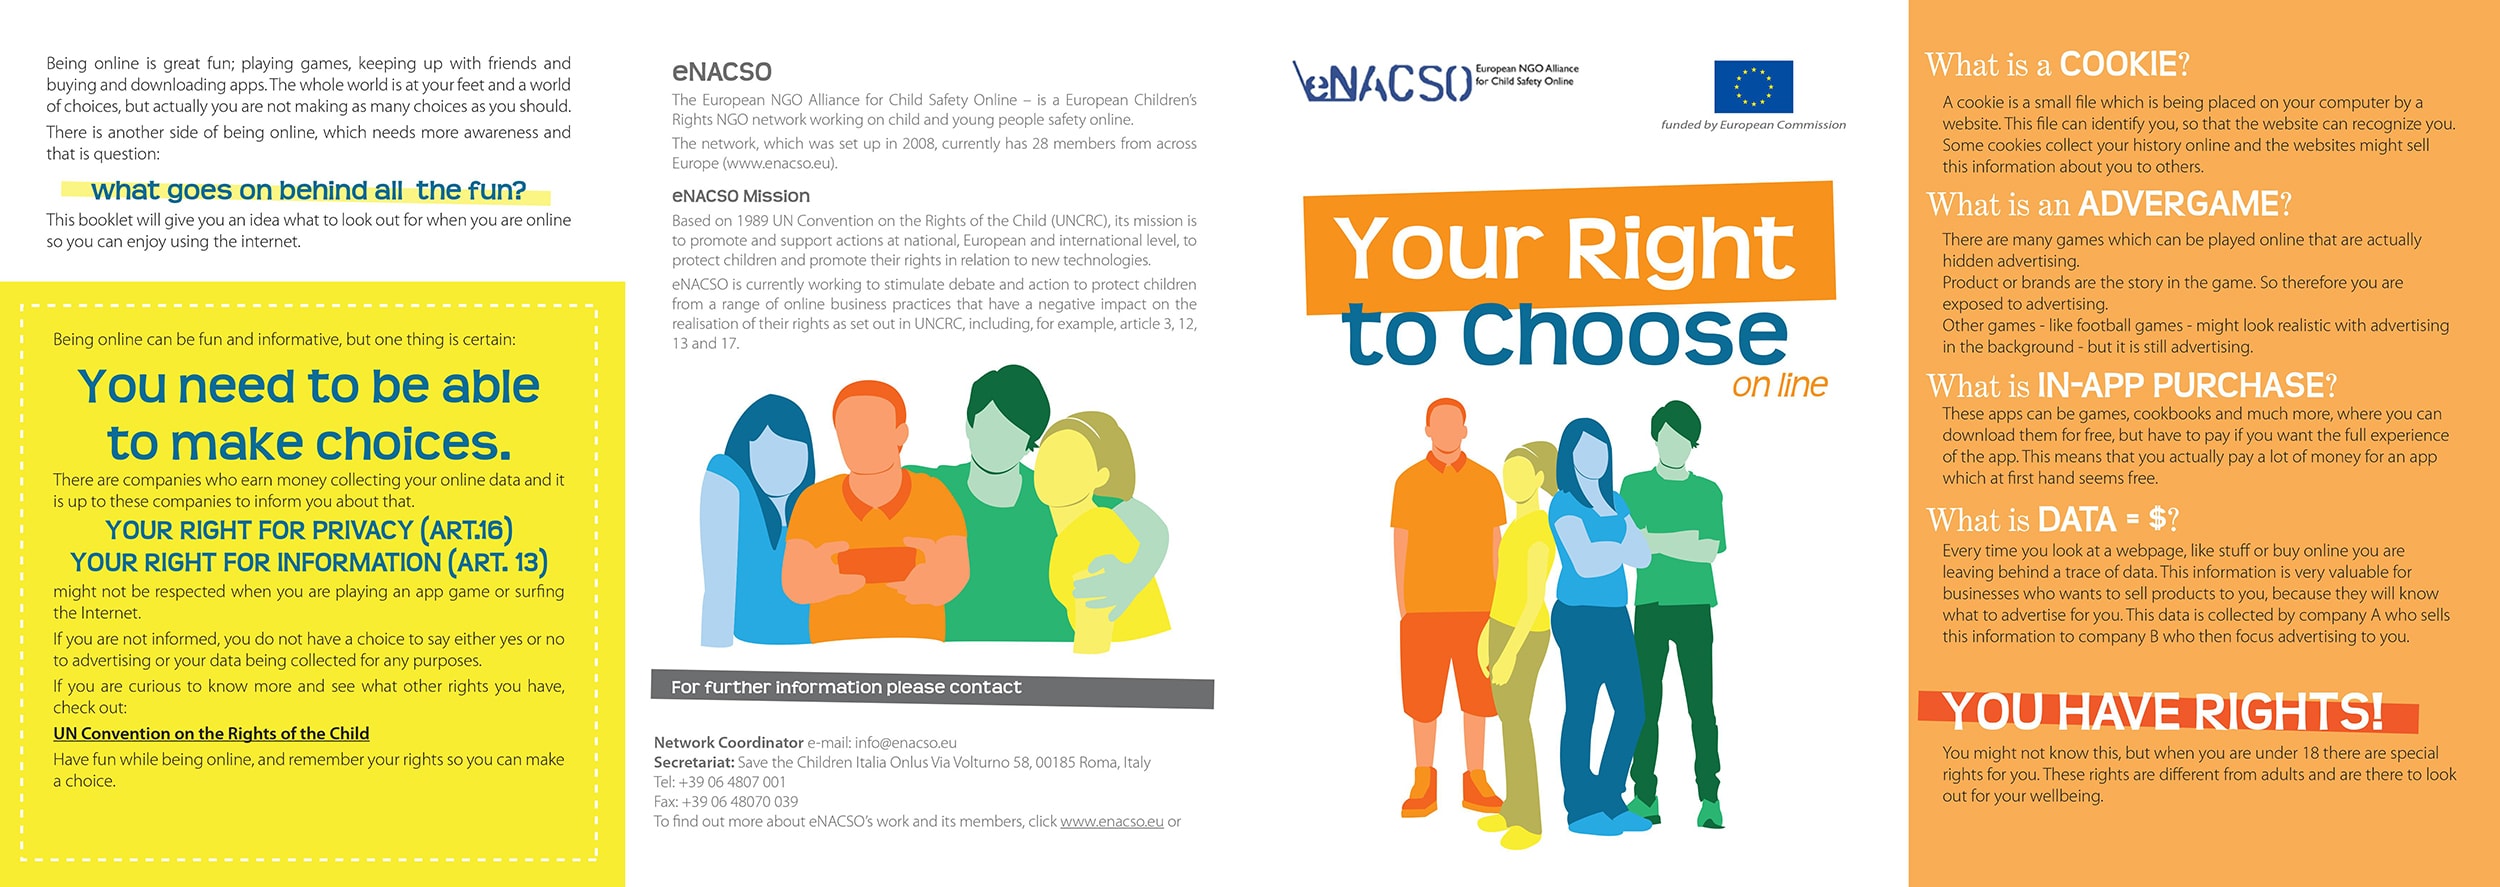 Your Right To Choose